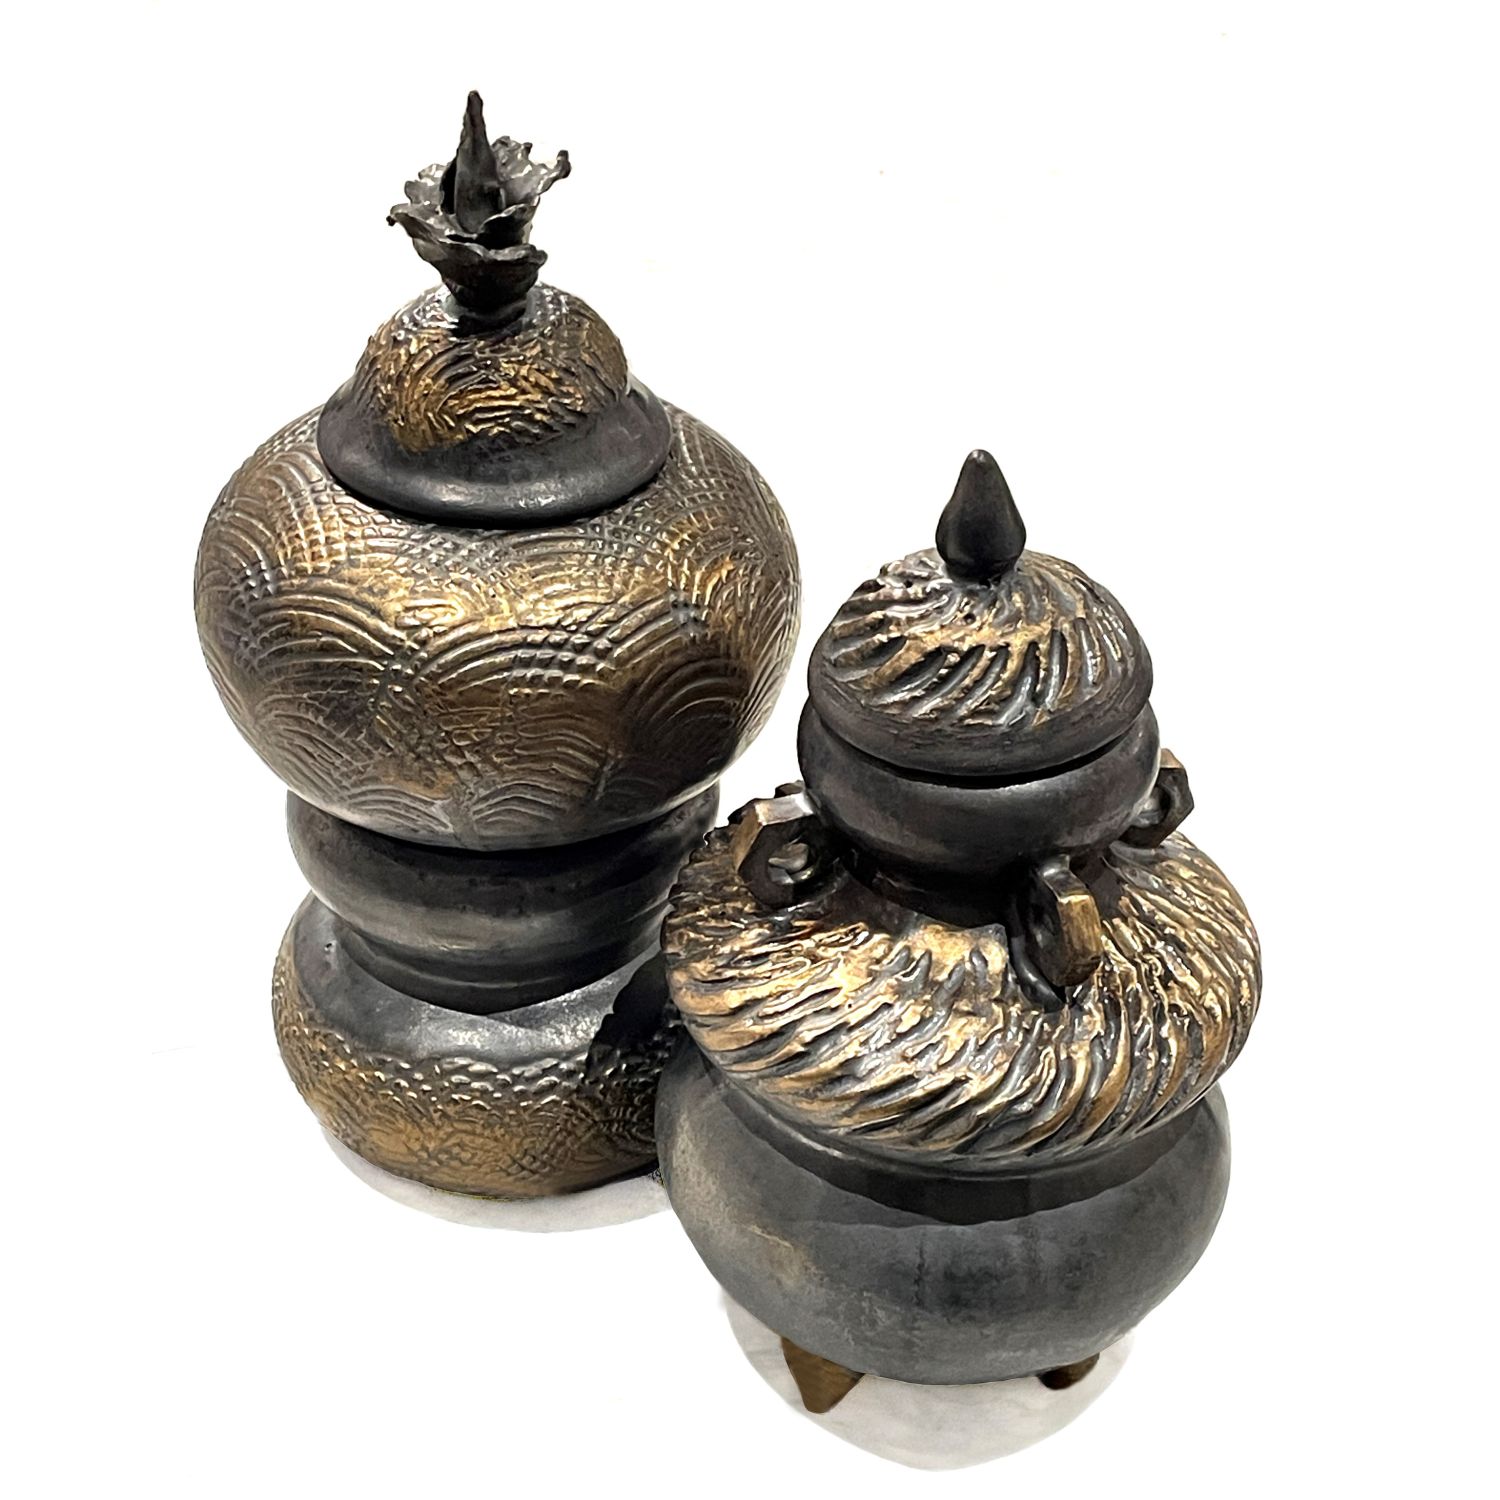 Christy Chor: Lidded Meditation Vessel (Each sold separately) Product Image 1 of 1